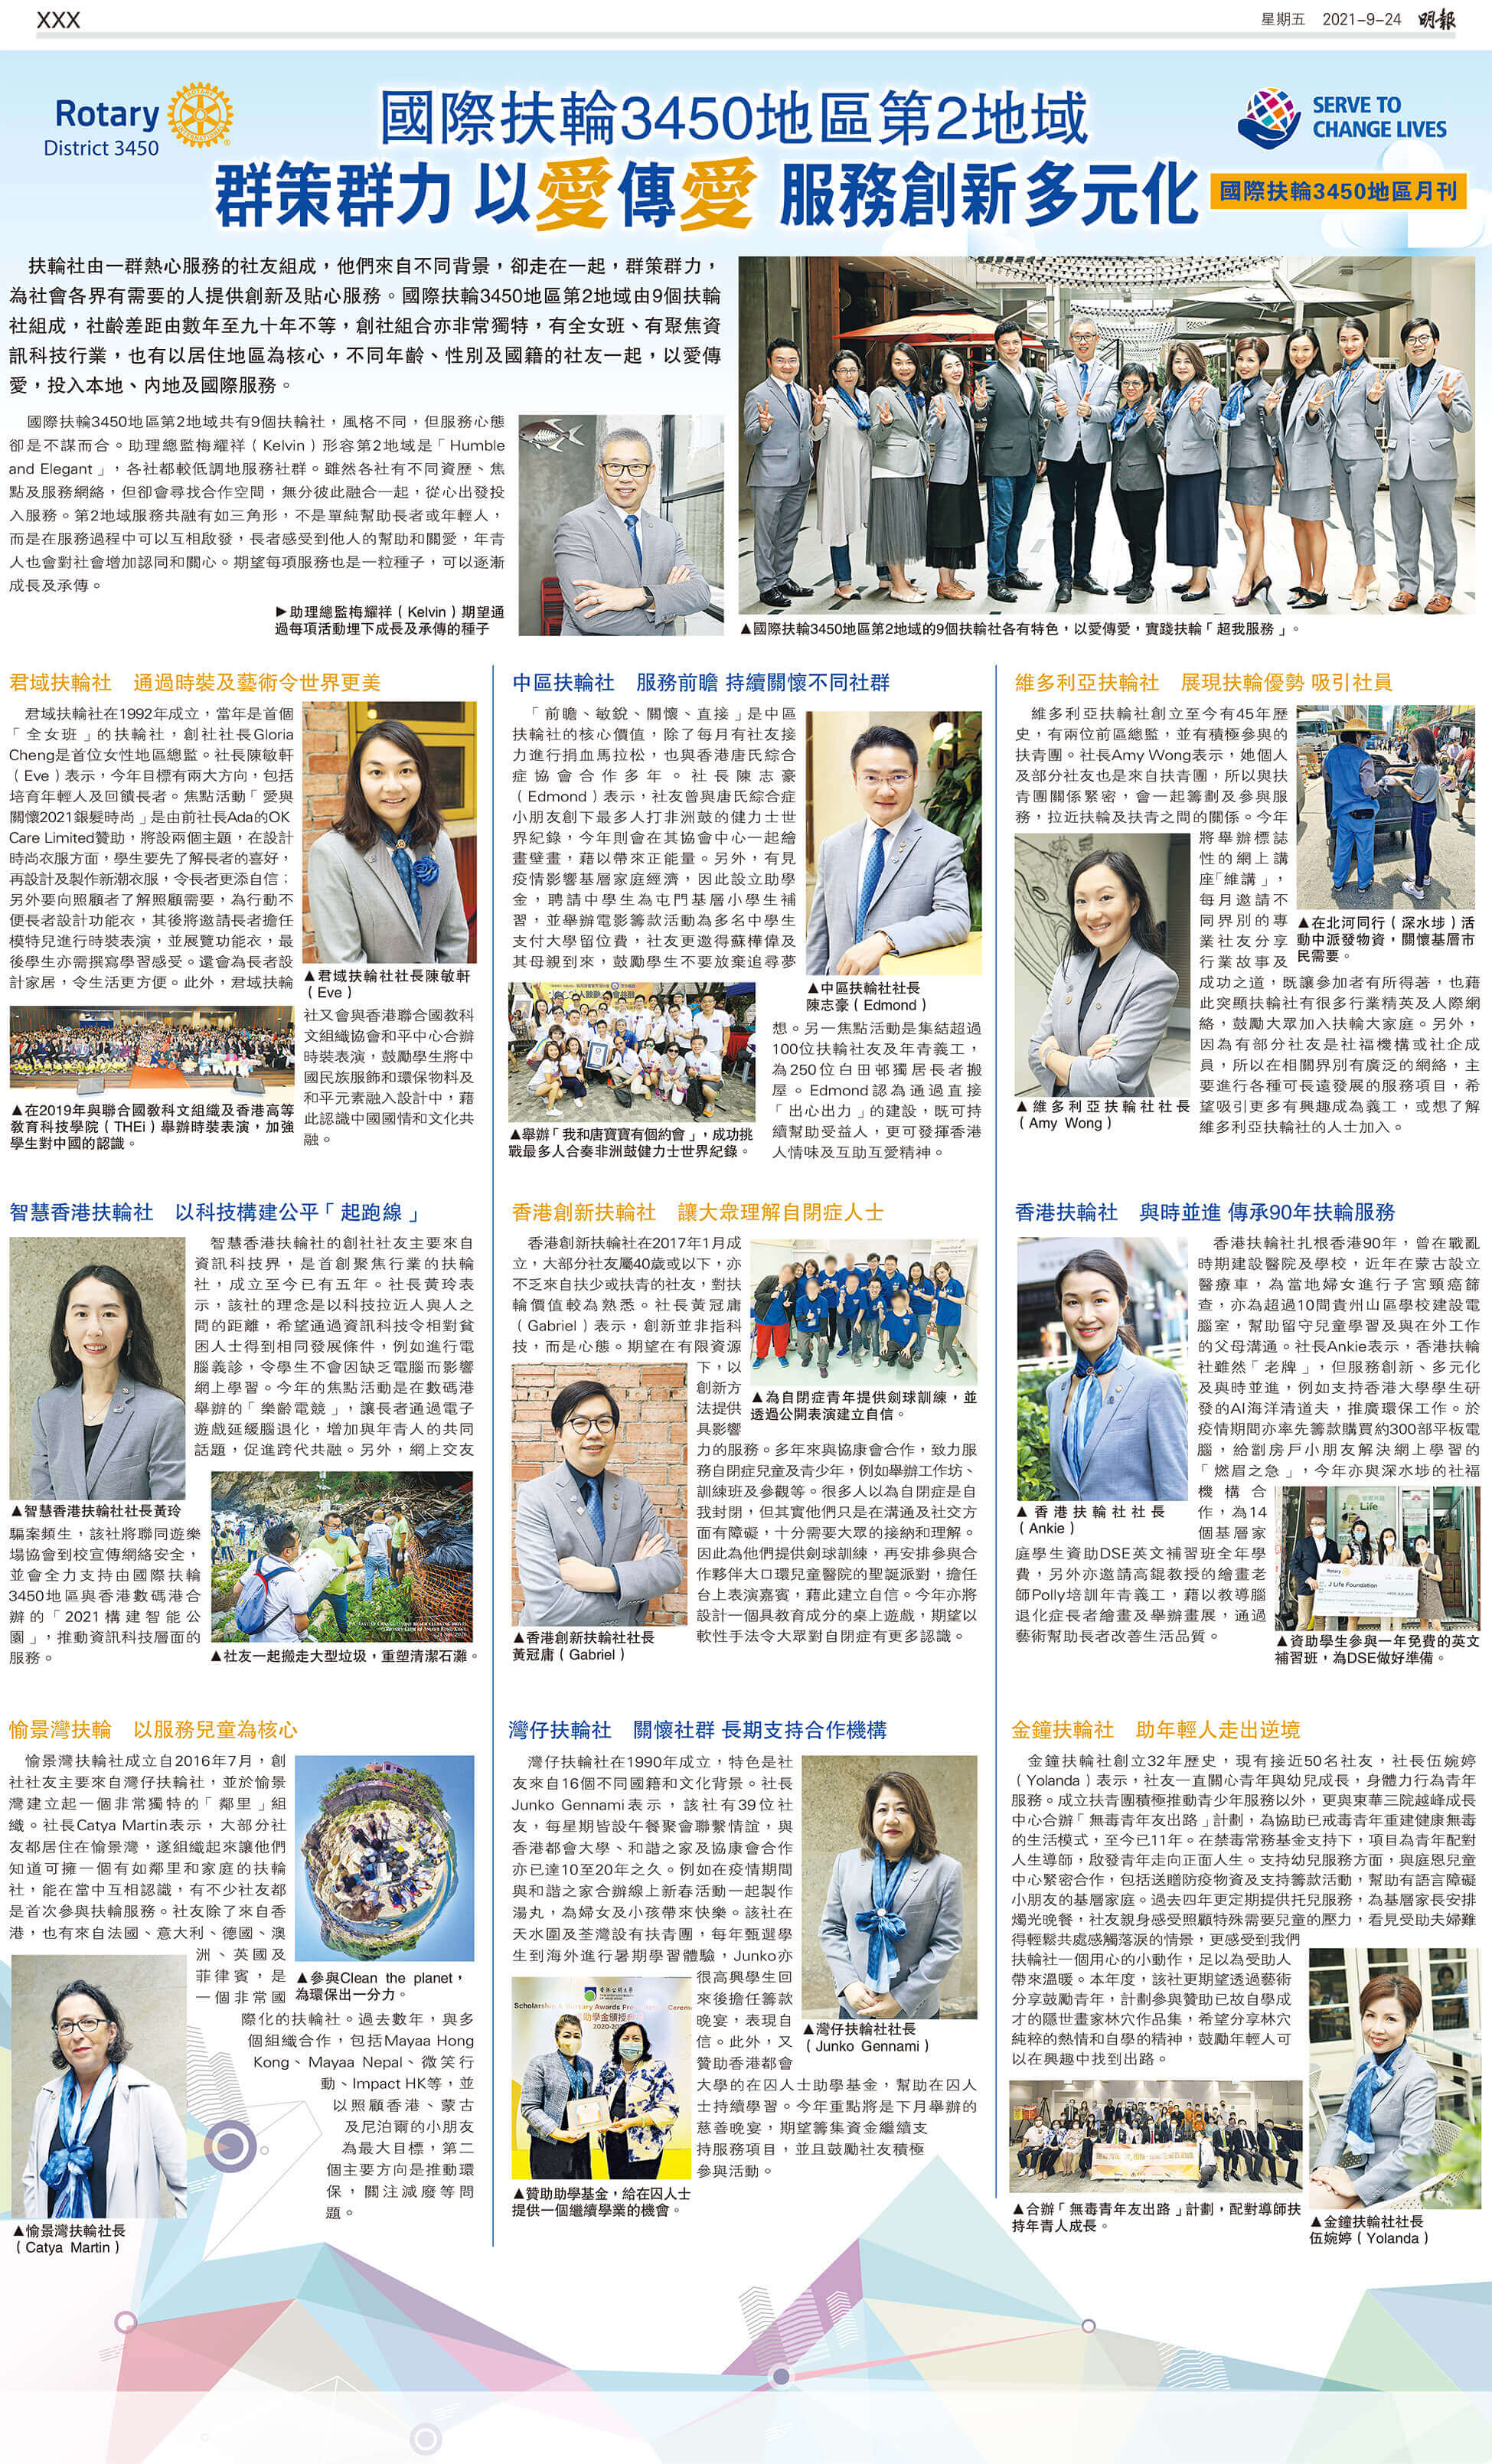 Area 2 Ming Pao interview